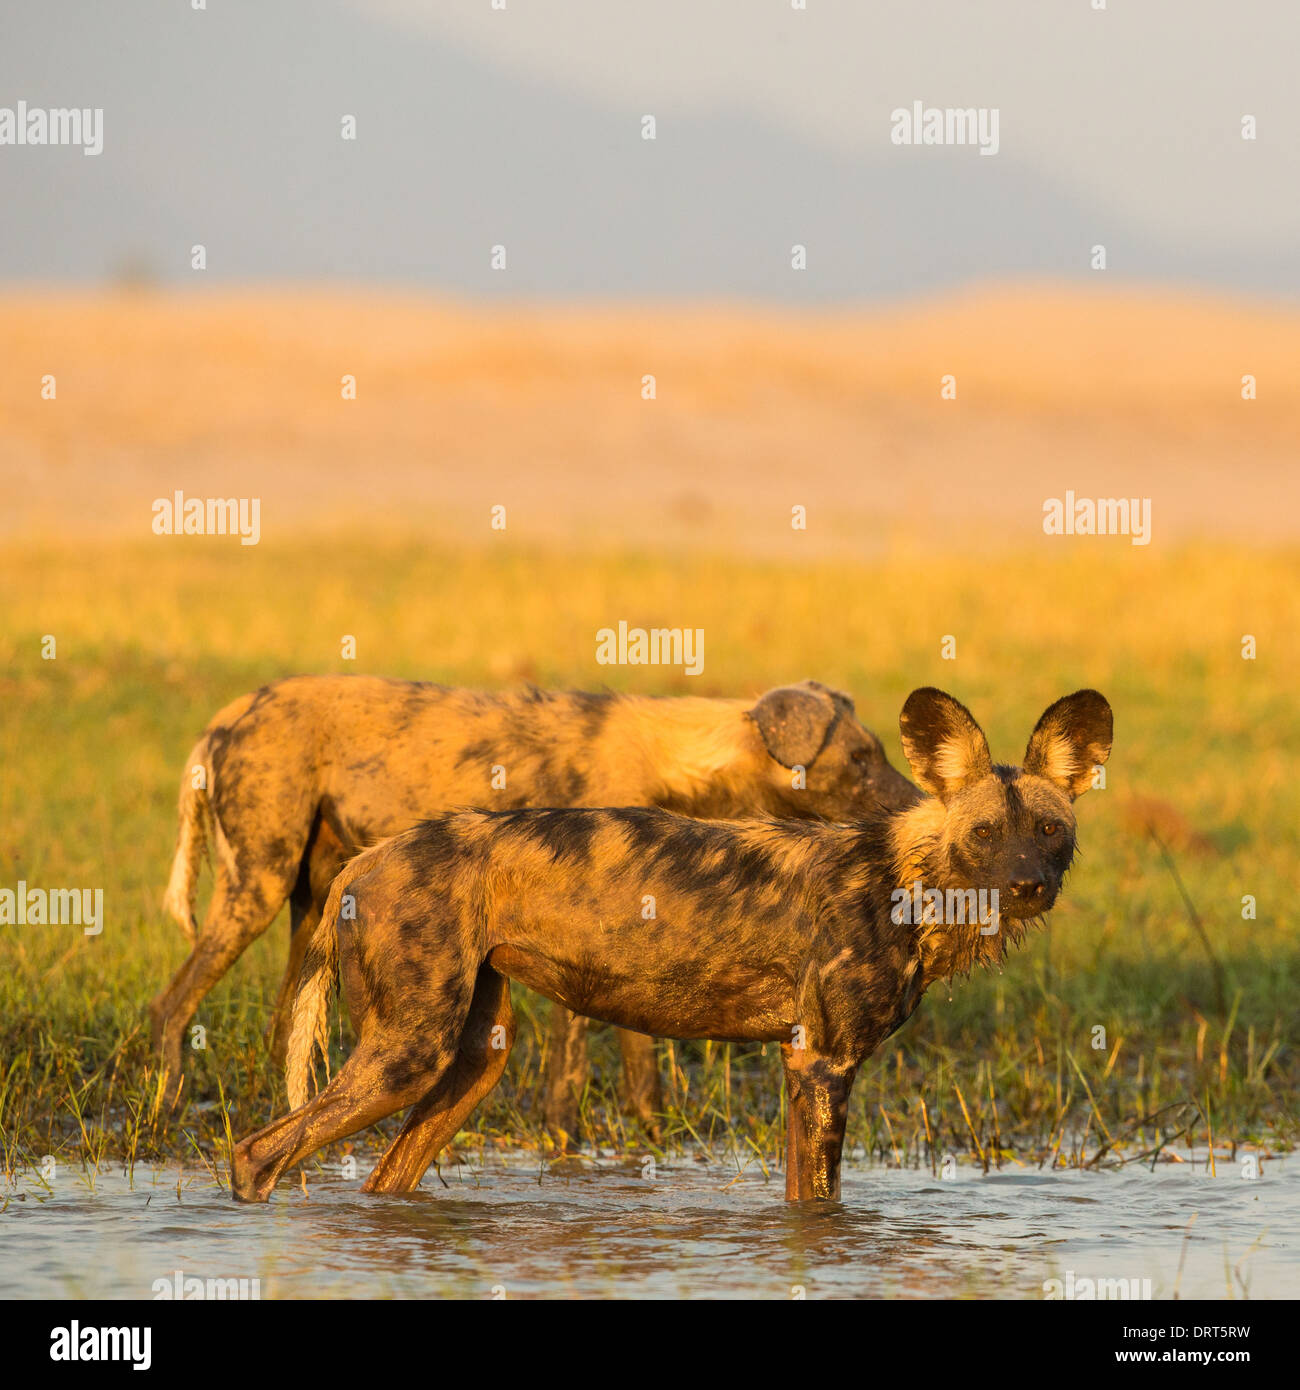 African Wild Dog (Lycaon pictus) standing in water looking at camera Stock Photo